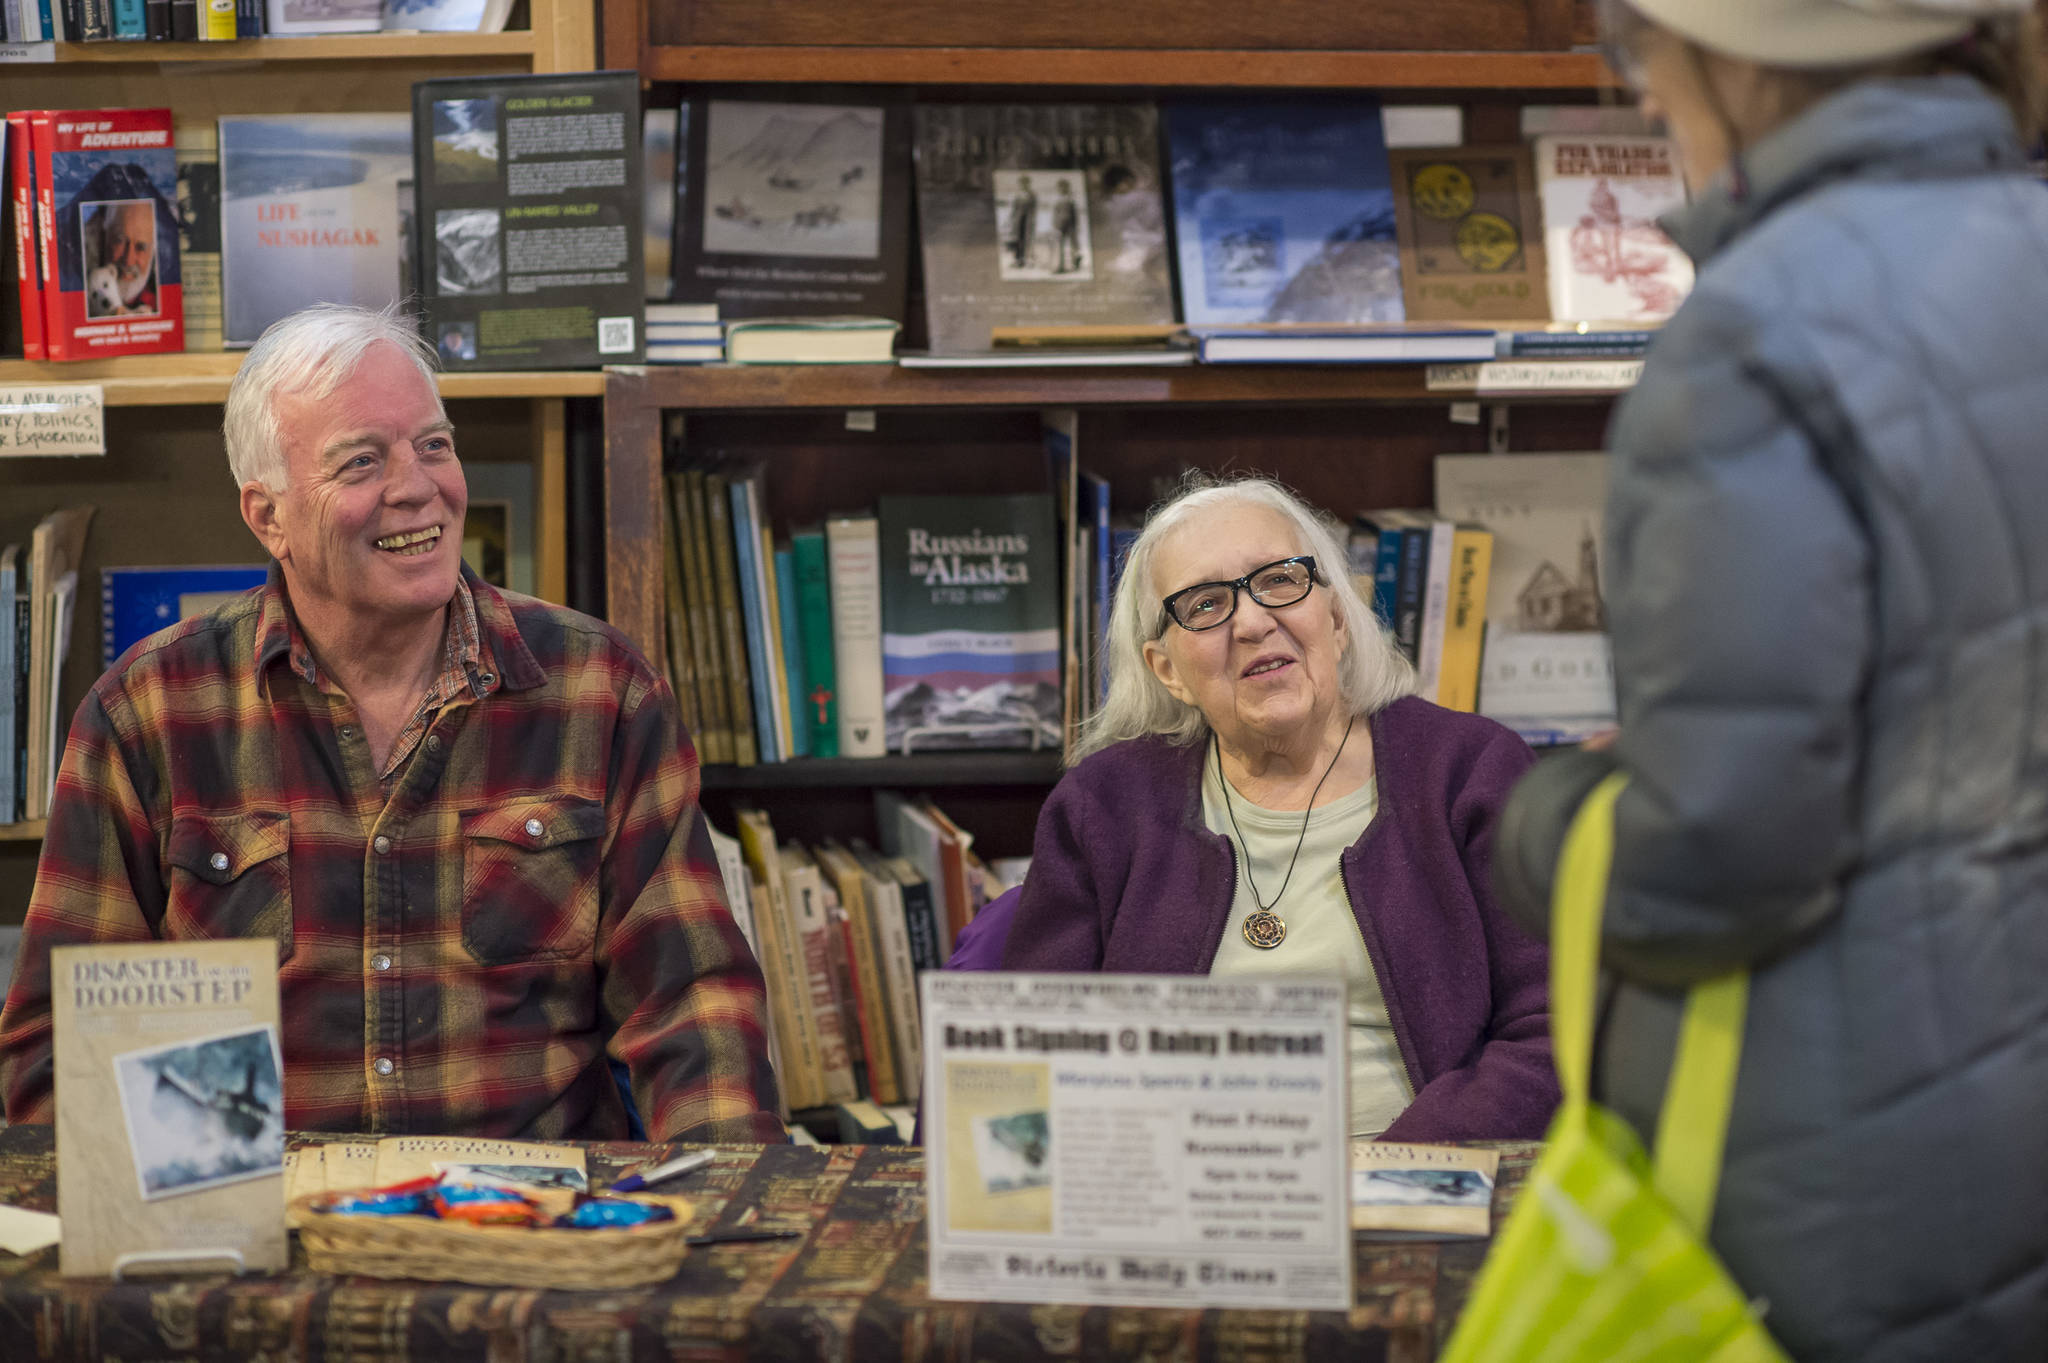 MaryLou Spartz, center, and co-author John Greely talk with Suzi Fowler as they sign their new book on the community of Juneau’s reaction to the sinking of the famous Princess Sophia at Rainy Retreat Books for First Friday on Friday, Nov. 2, 2018. Submissions for the next First Friday are due to the JAHC Nov. 21. (Michael Penn | Juneau Empire)